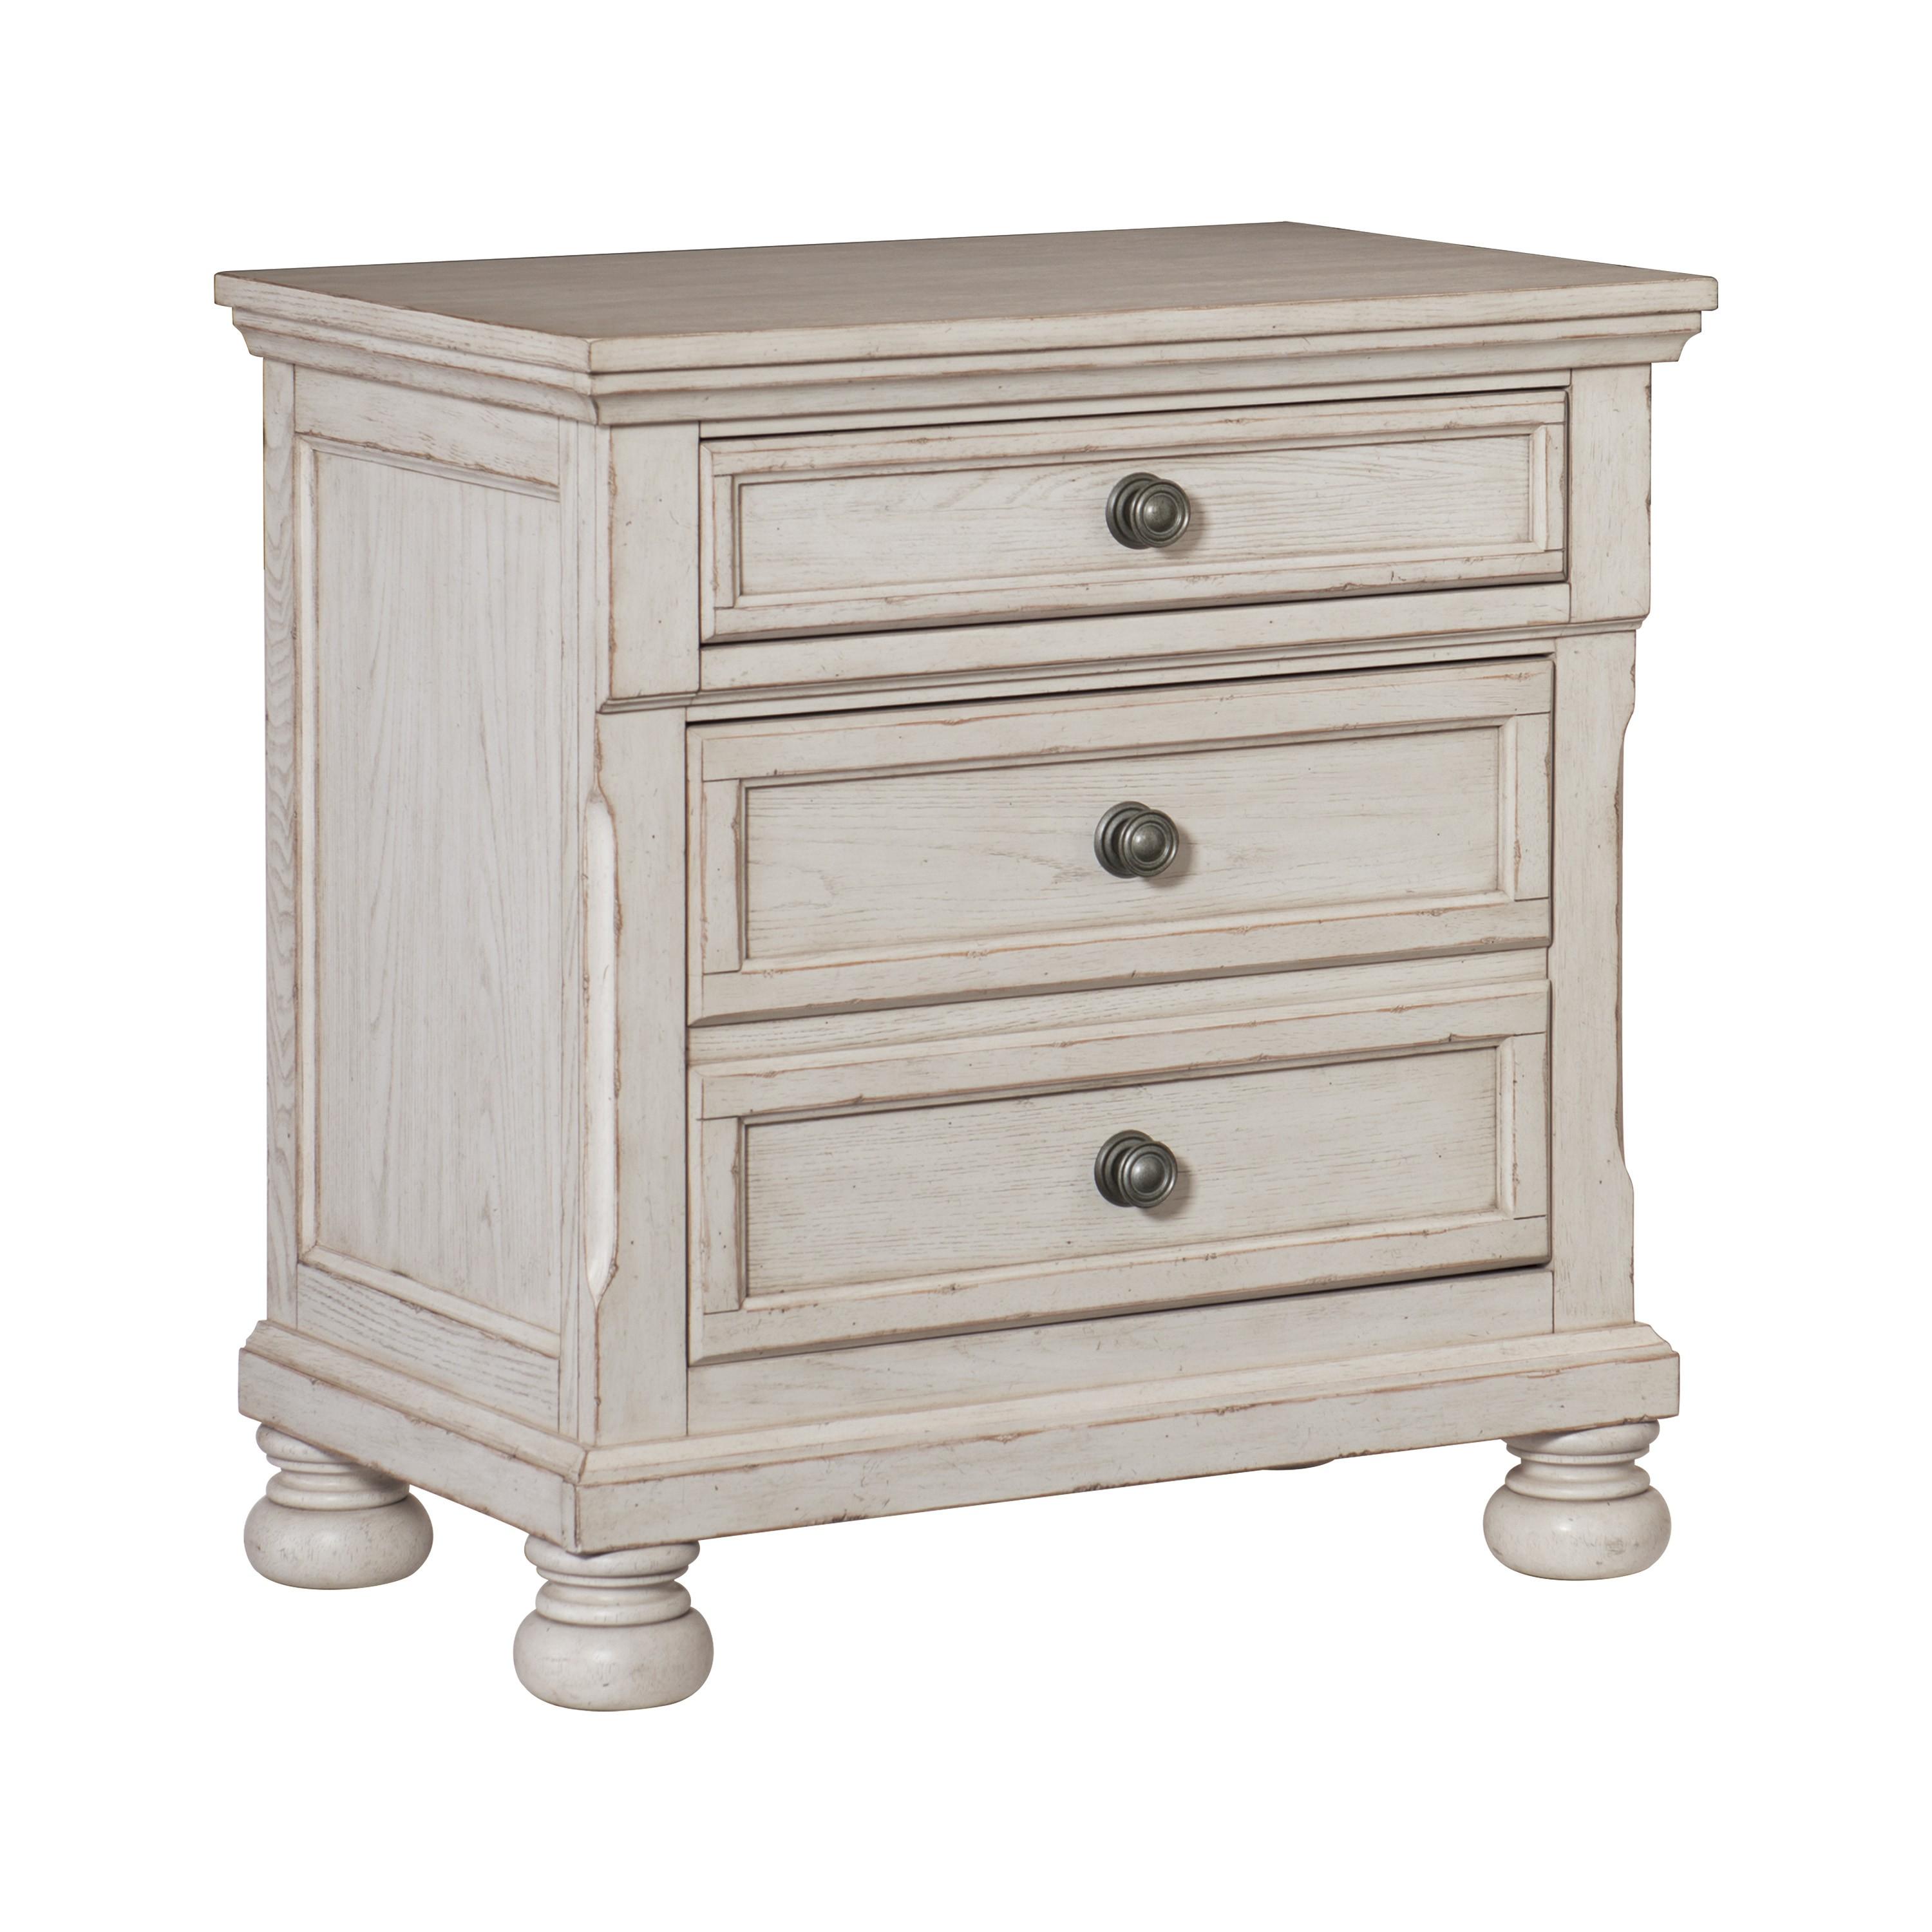 Transitional Nightstand 2259W-4 Bethel 2259W-4 in White 